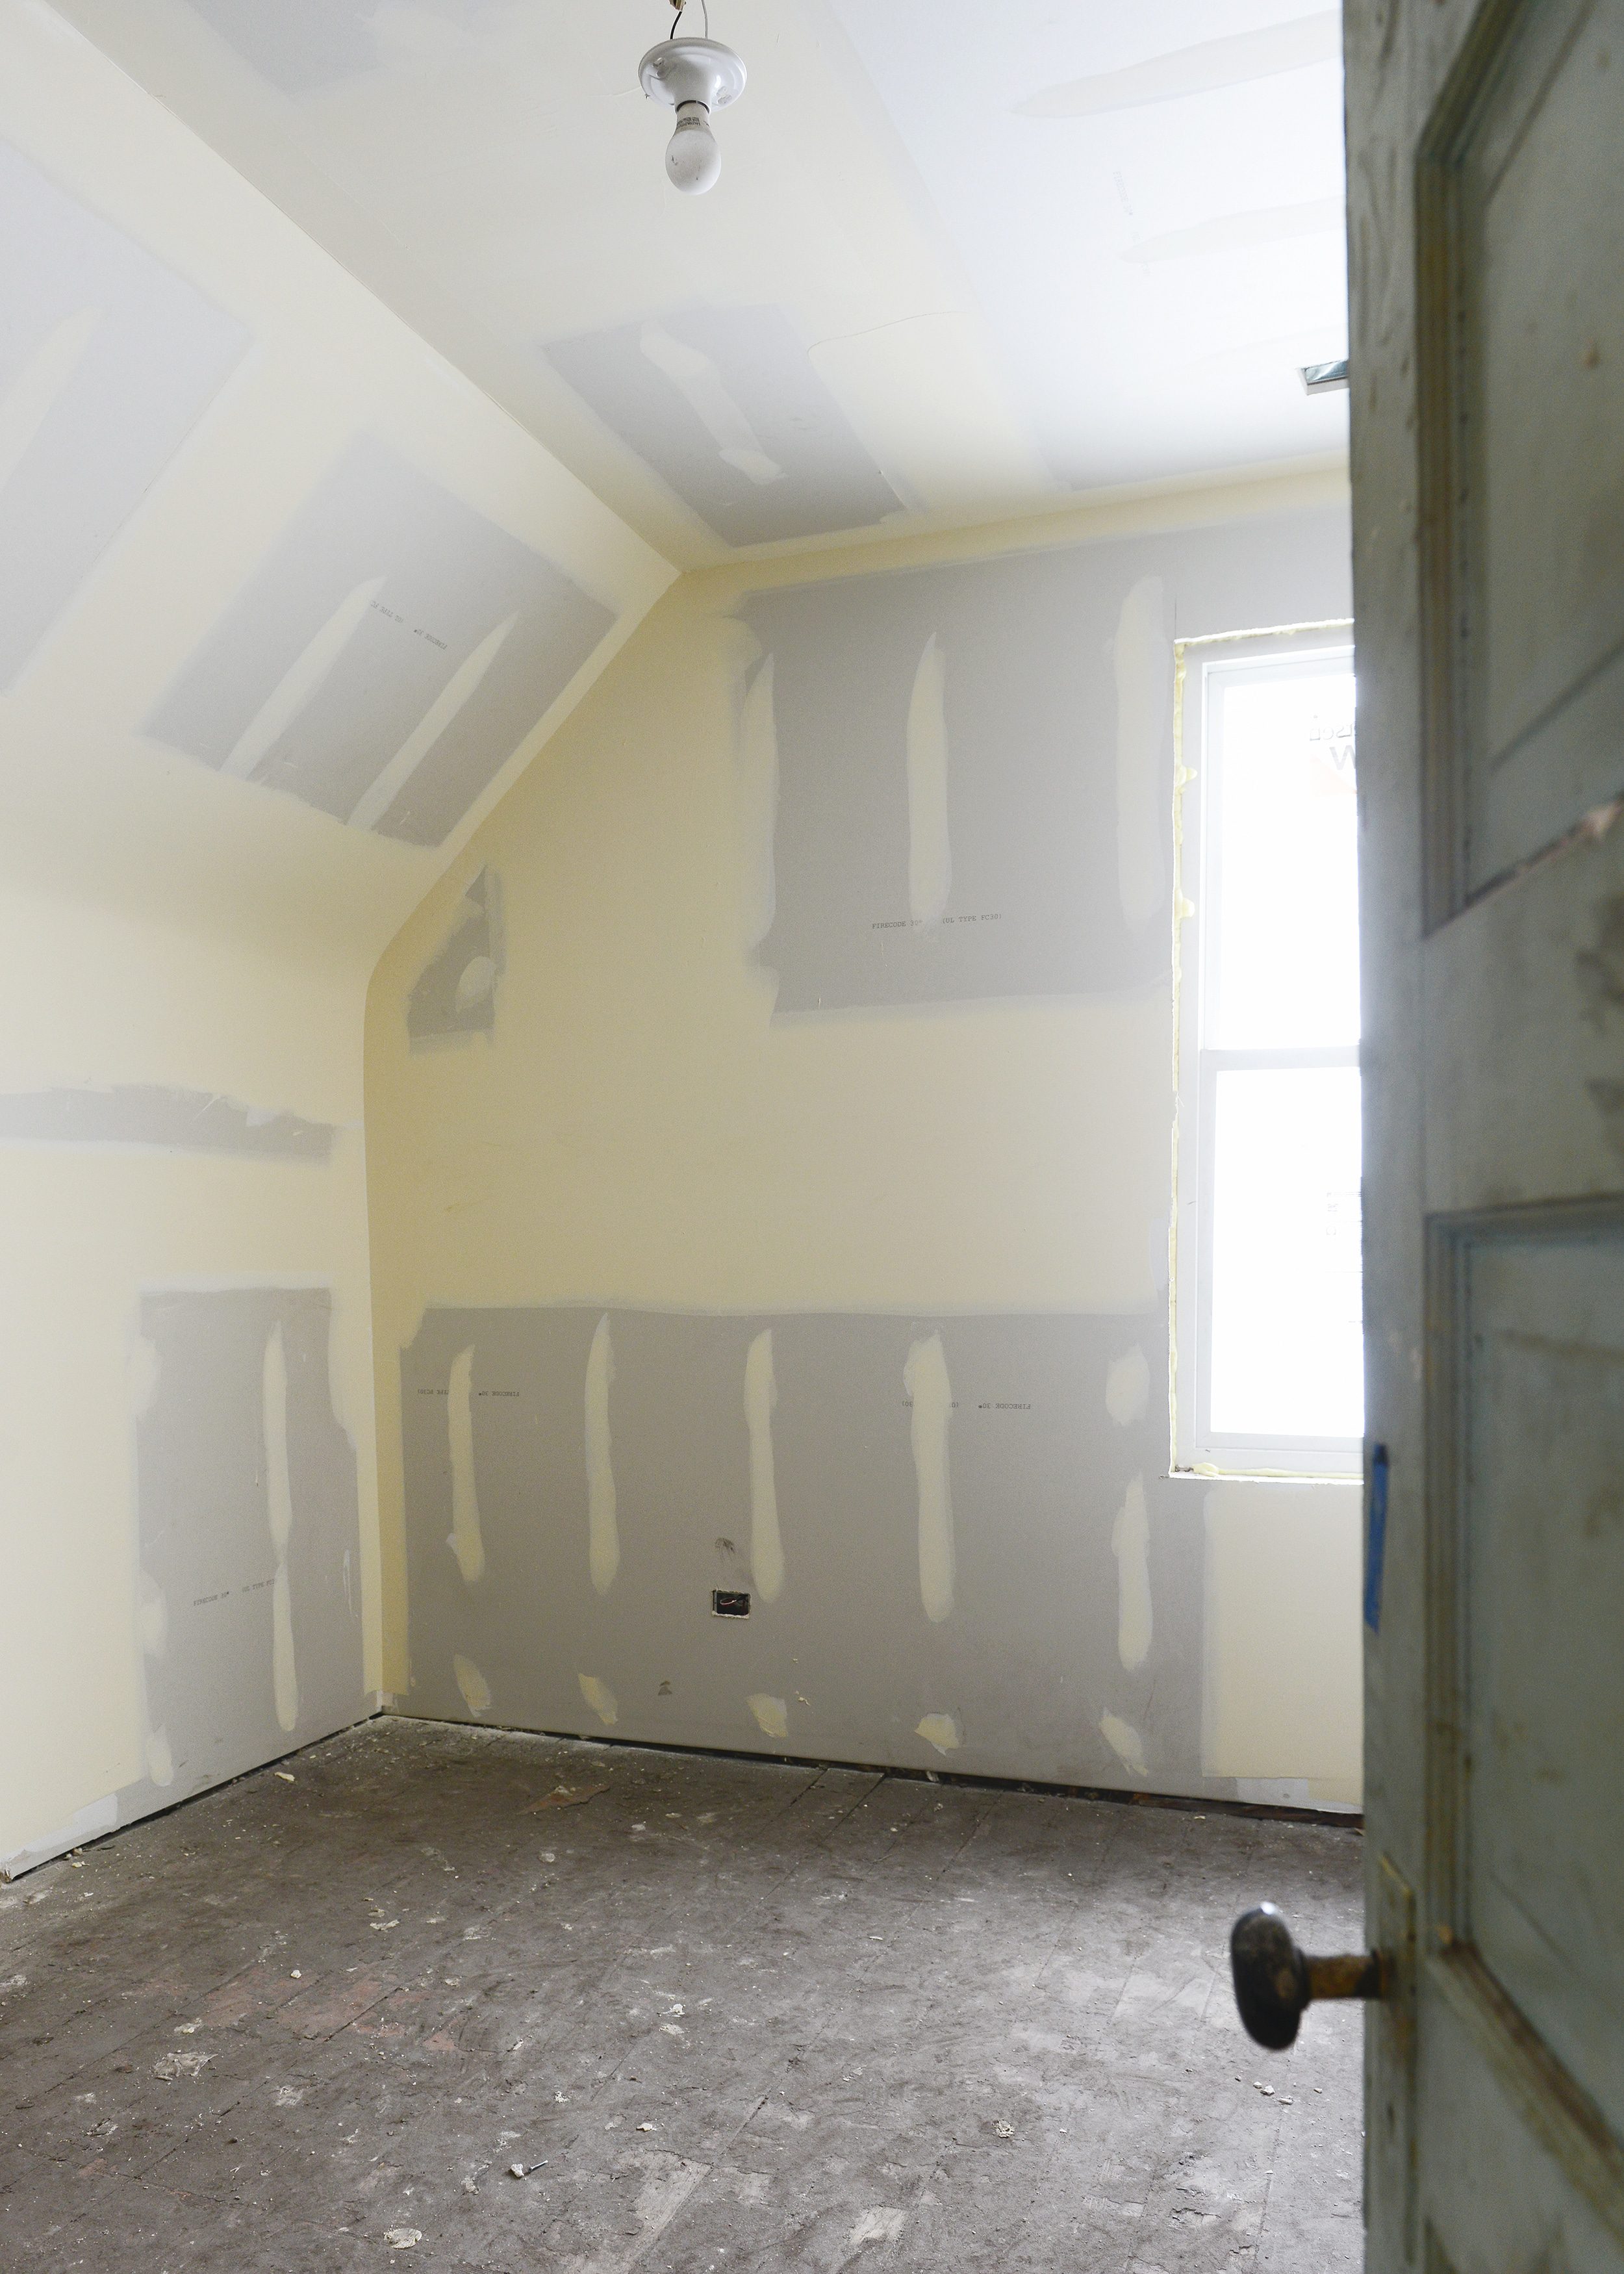 A vintage door opens into a freshly drywalled bedroom with a sloped ceiling